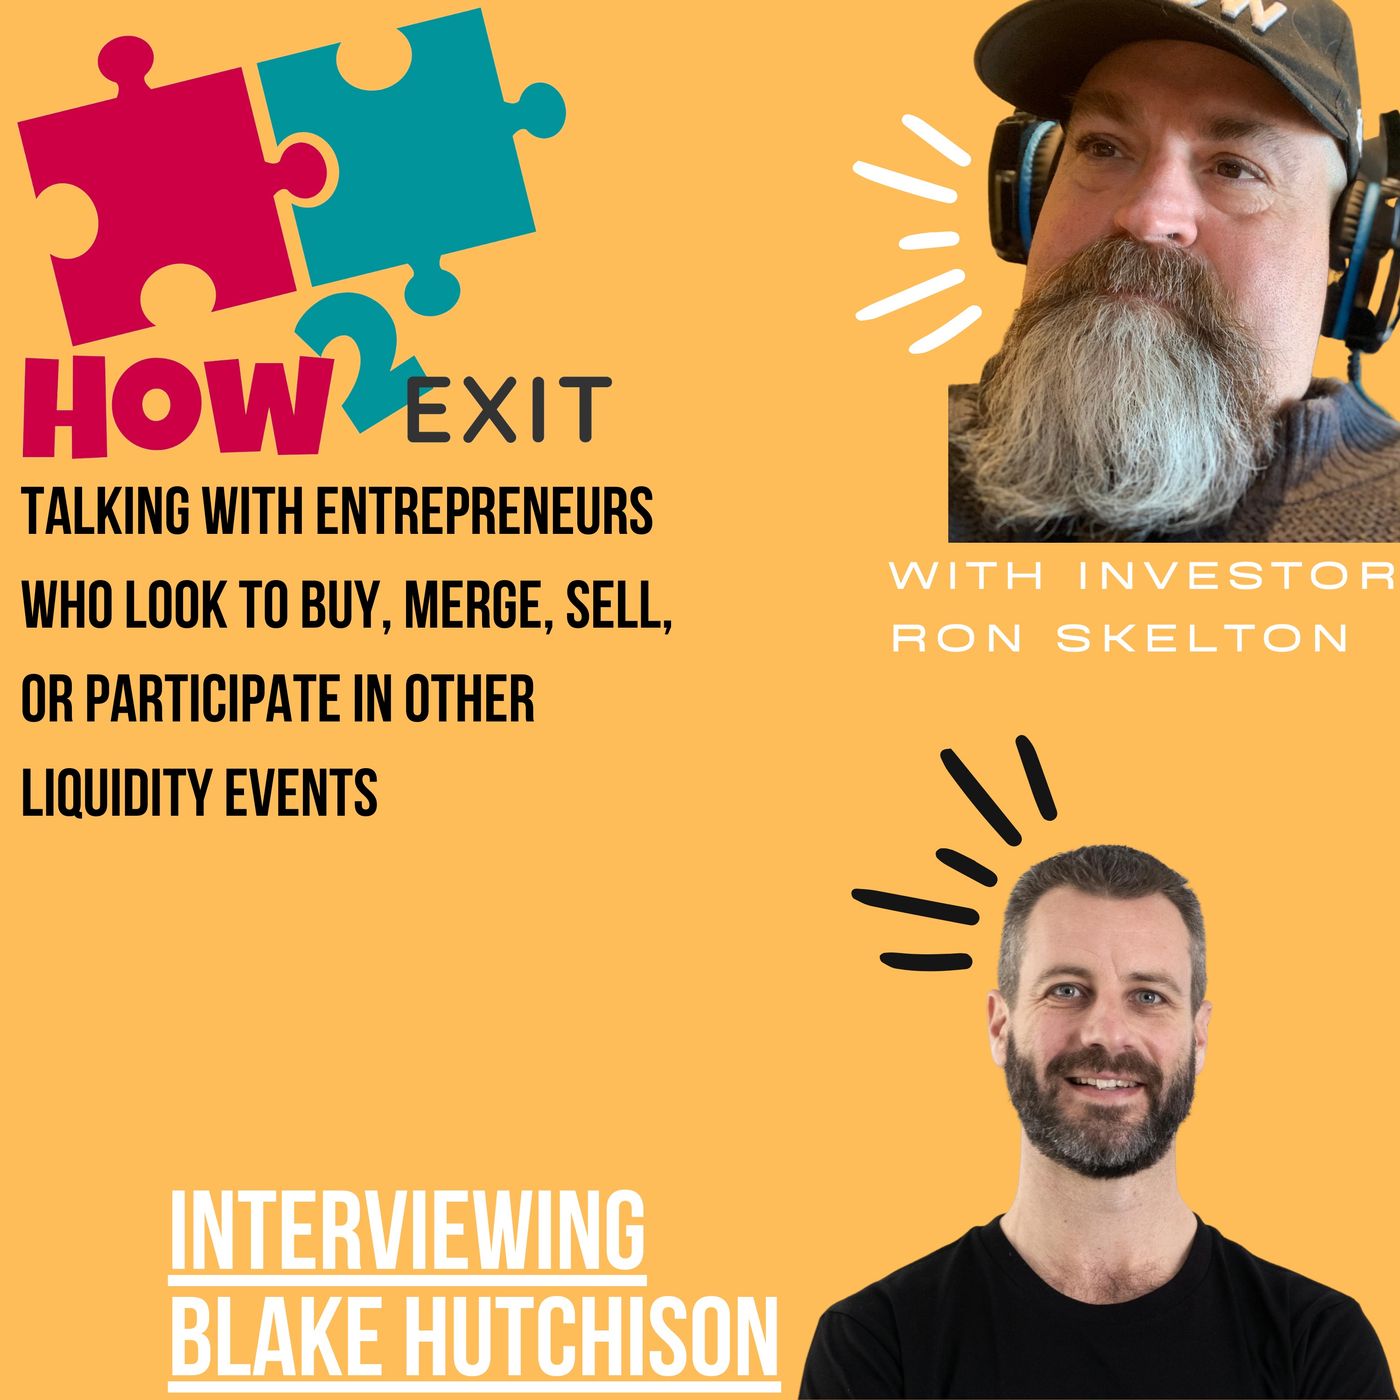 How2Exit Episode 40: Blake Hutchison - CEO of Flippa, marketplace to buy and sell digital assets. Image